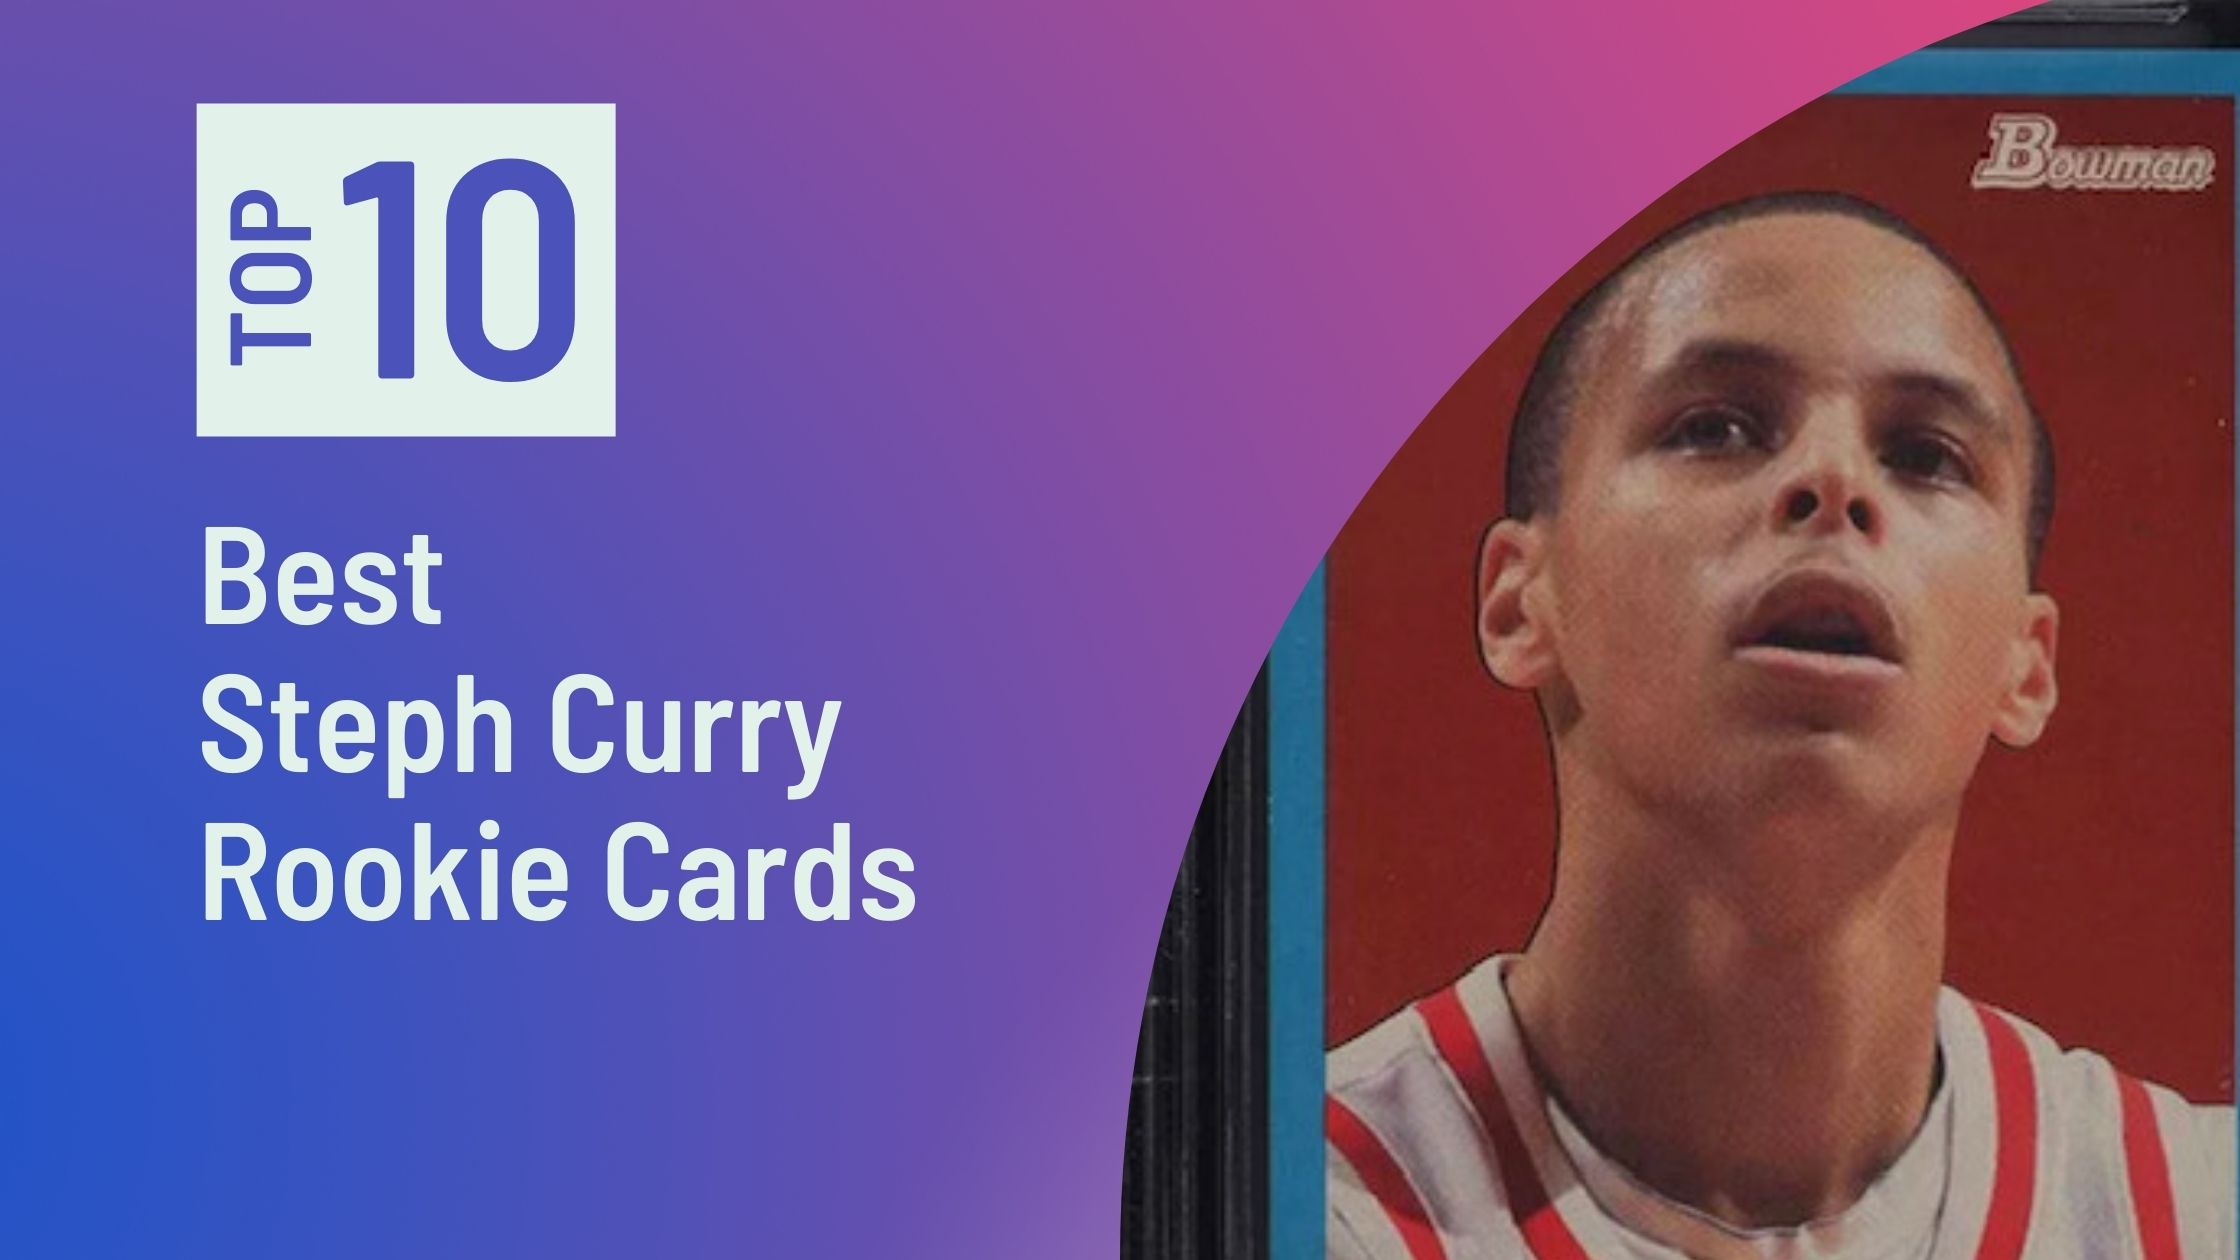 Photo of Best Steph Curry Rookie Cards